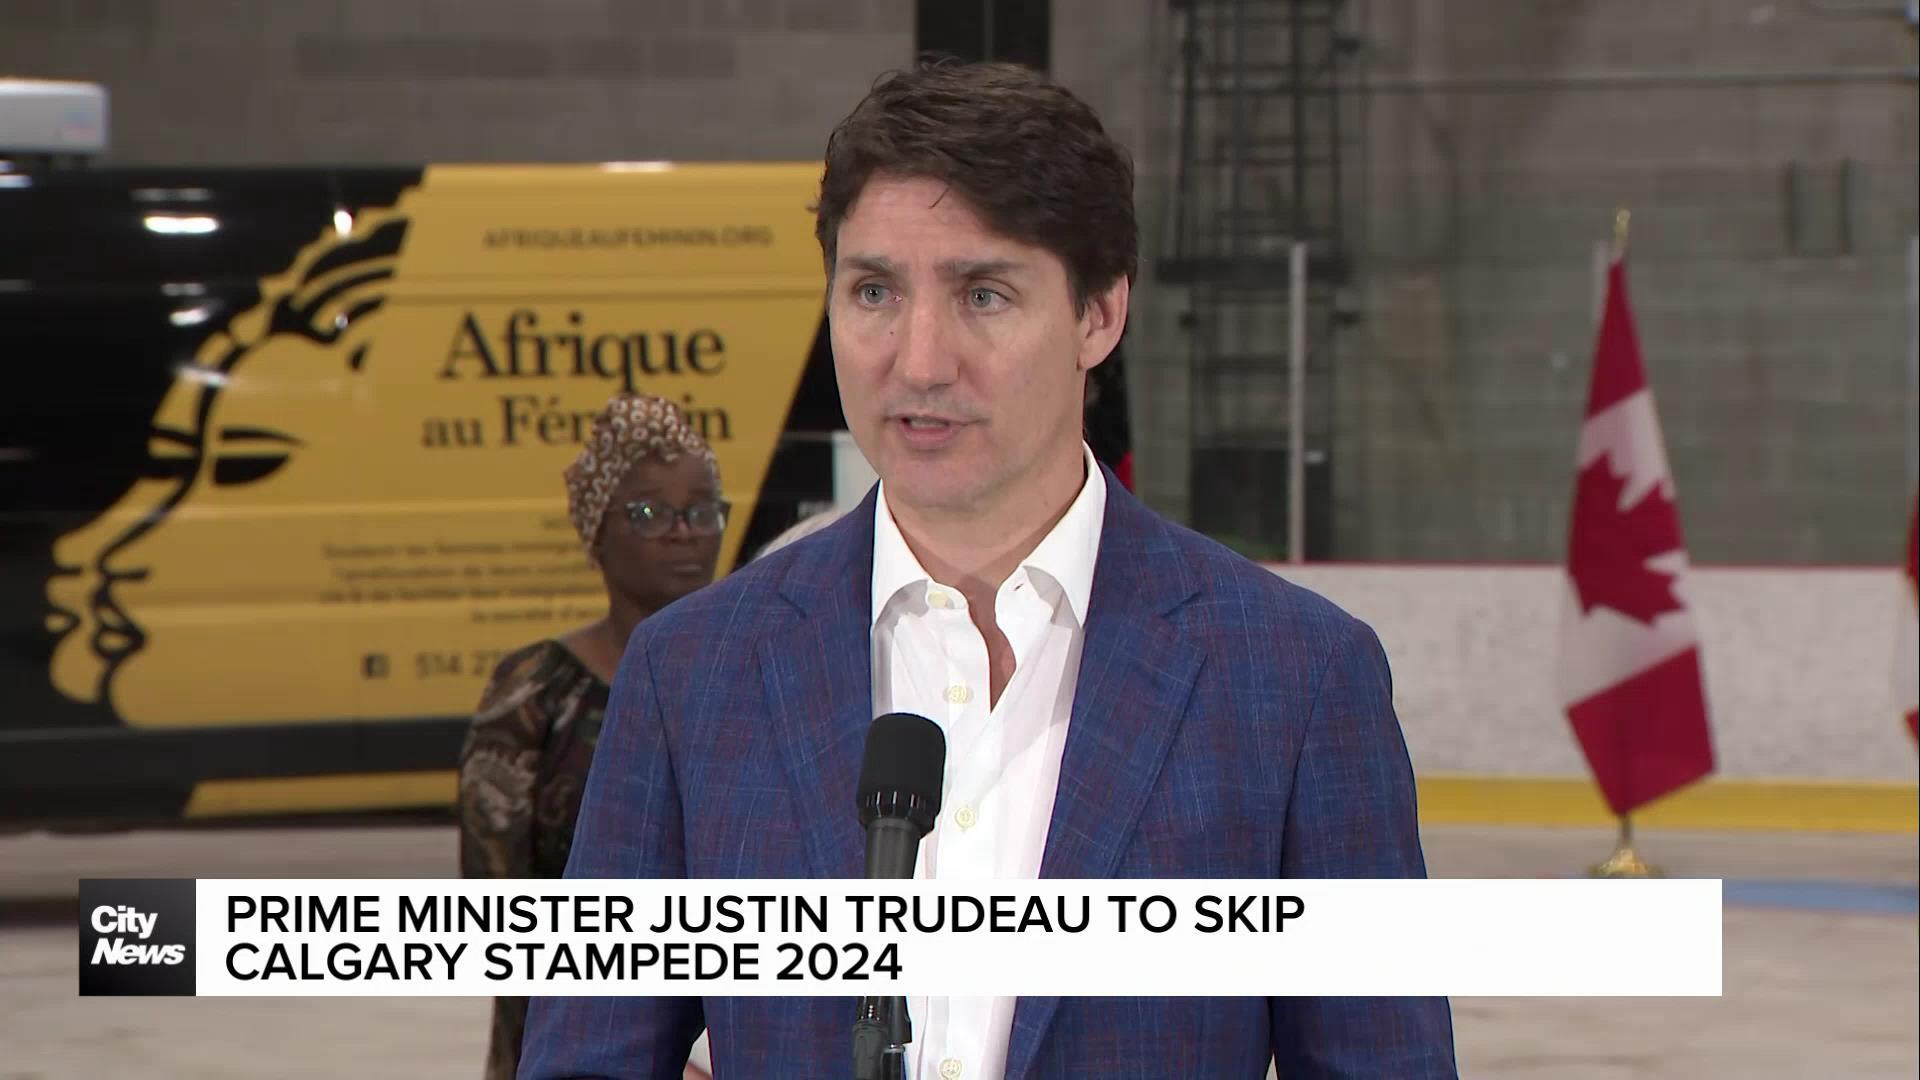 Prime Minister Justin Trudeau to skip Calgary Stampede